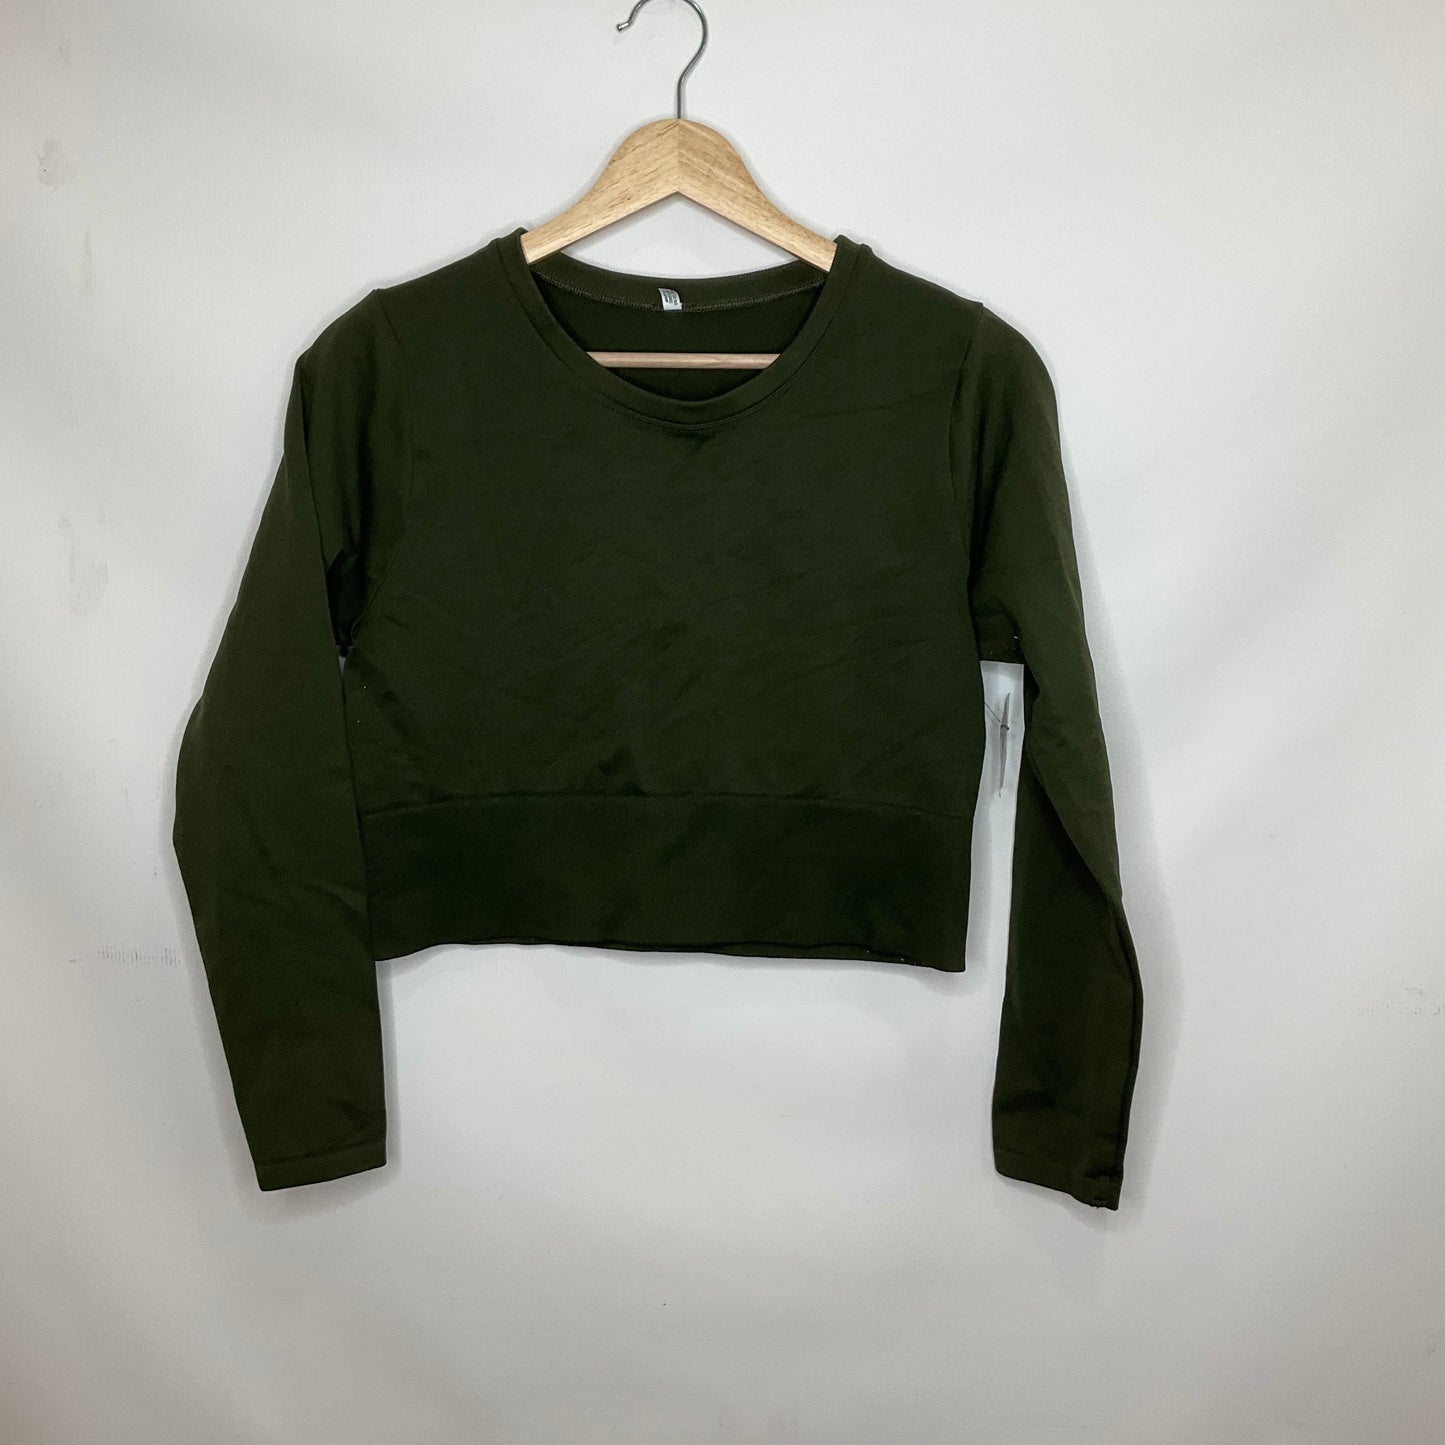 Green Athletic Top Long Sleeve Collar Aerie, Size L